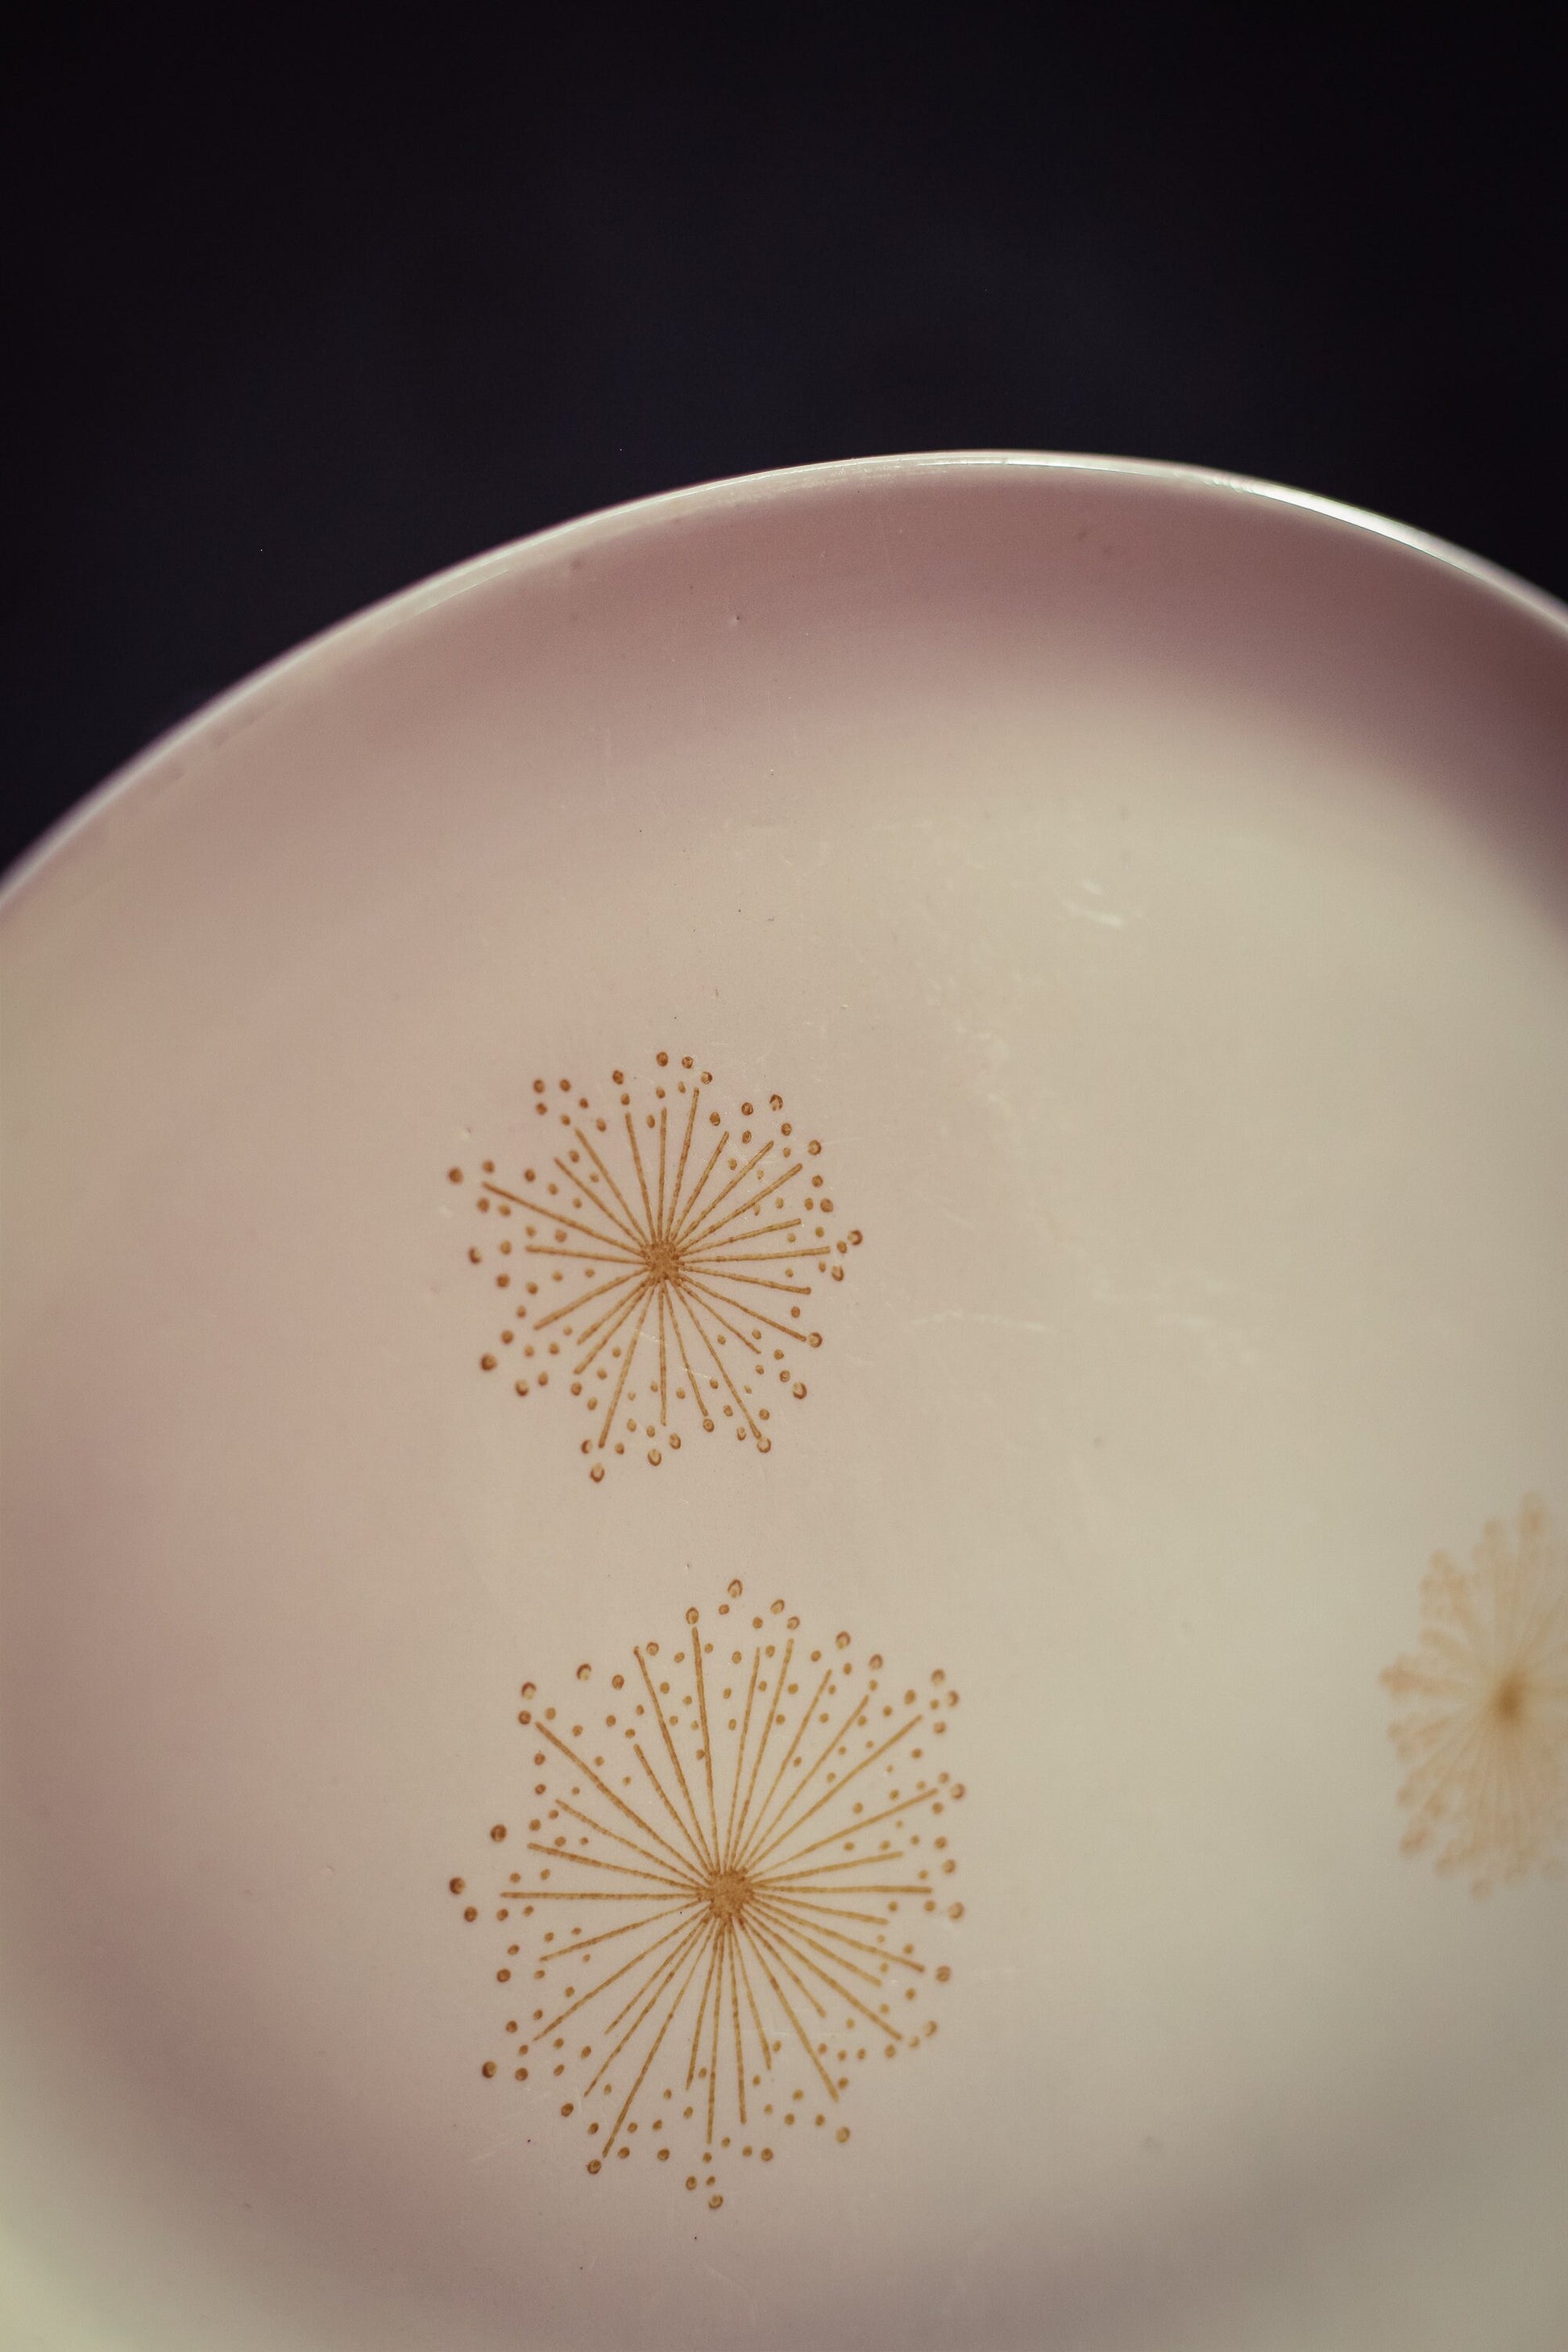 Stetson Hand Painted Oval Platter with Midcentury Modern Star Design - Vintage Stetson Ceramic Serving Plate